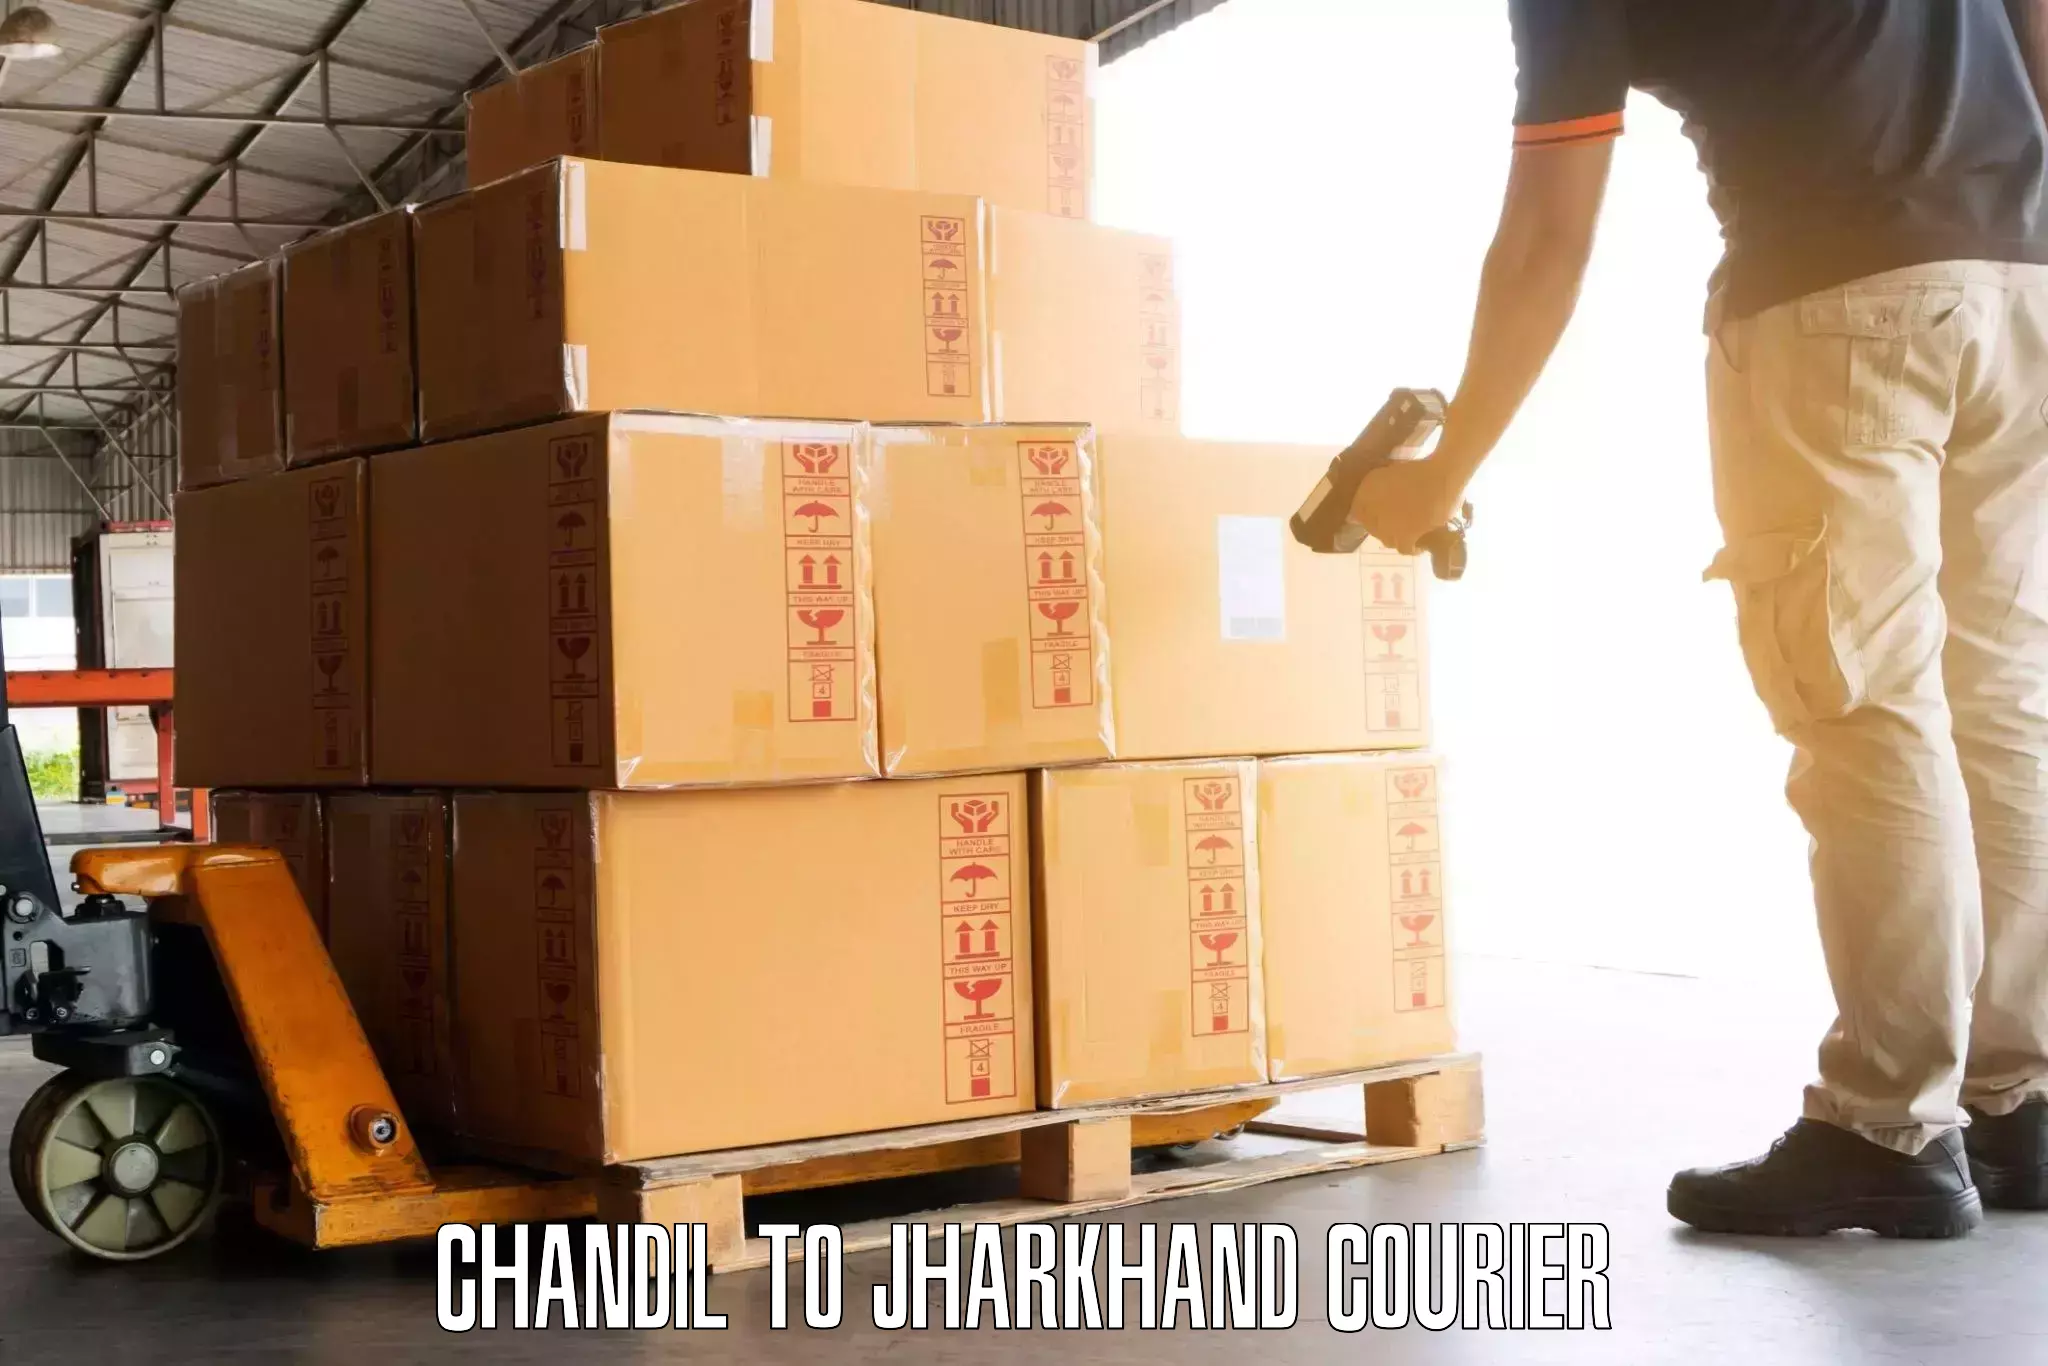 Luggage shipment specialists Chandil to Isri